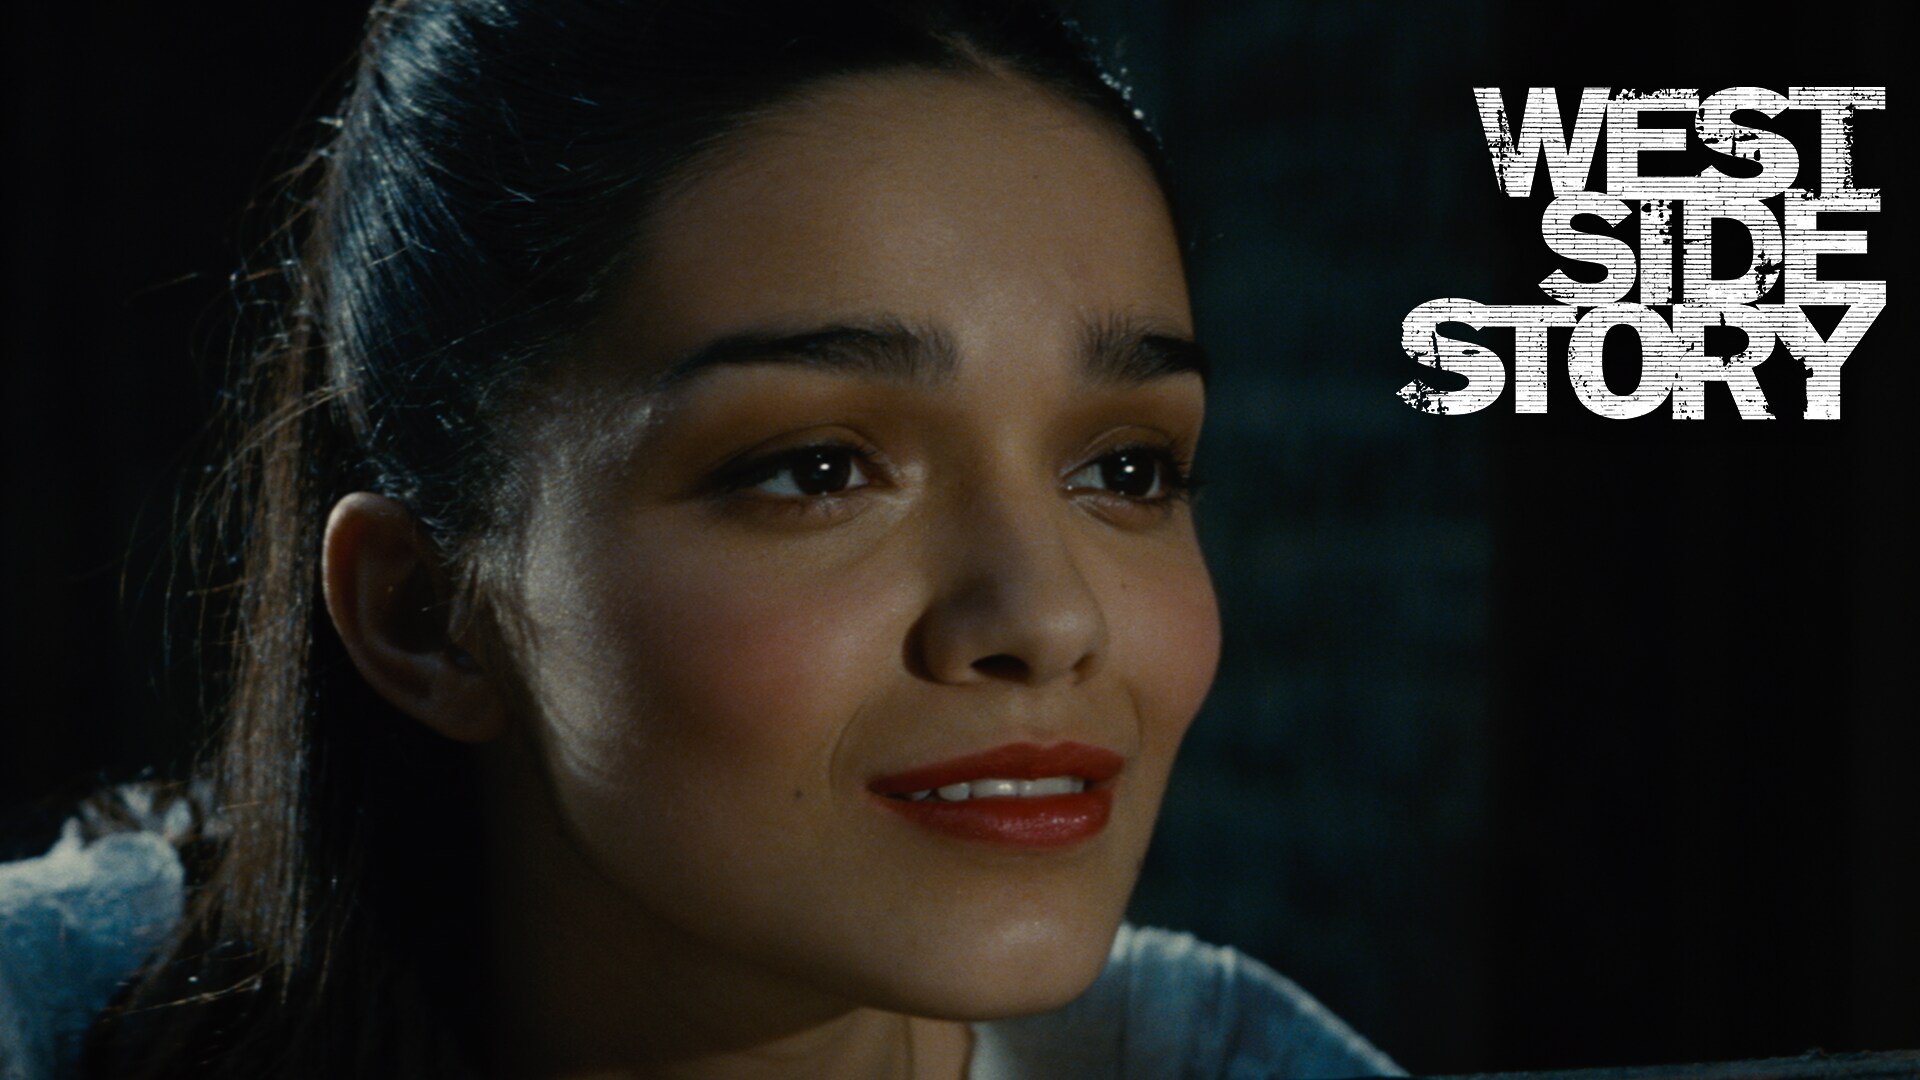 This holiday season, celebrate the greatest love story of all time. Get tickets now to experience Steven Spielberg’s #WestSideStory. Only in theaters in 10 days. fandango.com/WestSideStory